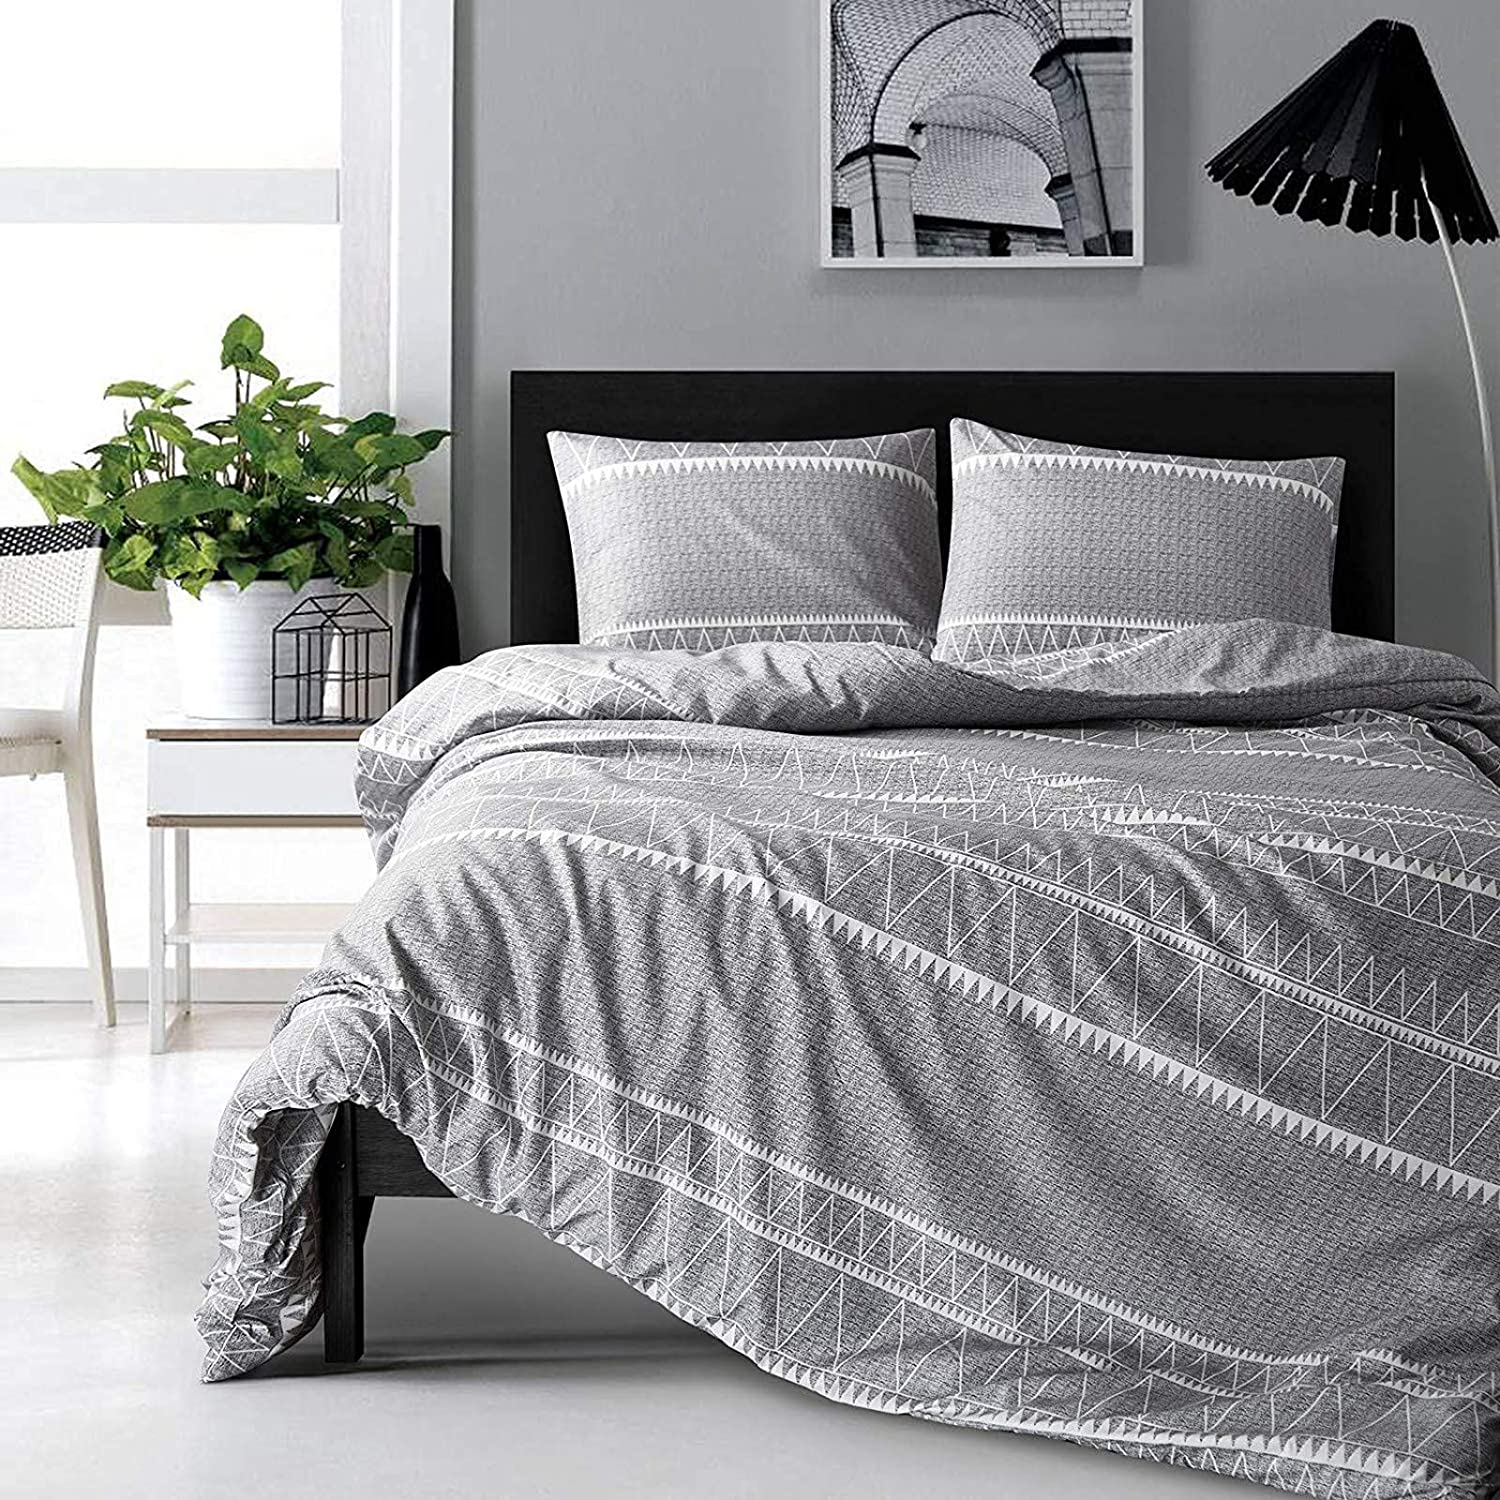 Price:$58.99  Bohemian King Duvet Cover Set Lightweight Soft Grey 3PC Comforter Cover Set Hotel Quality Bedding Set - Oeko-TEX Certificated : Home & Kitchen